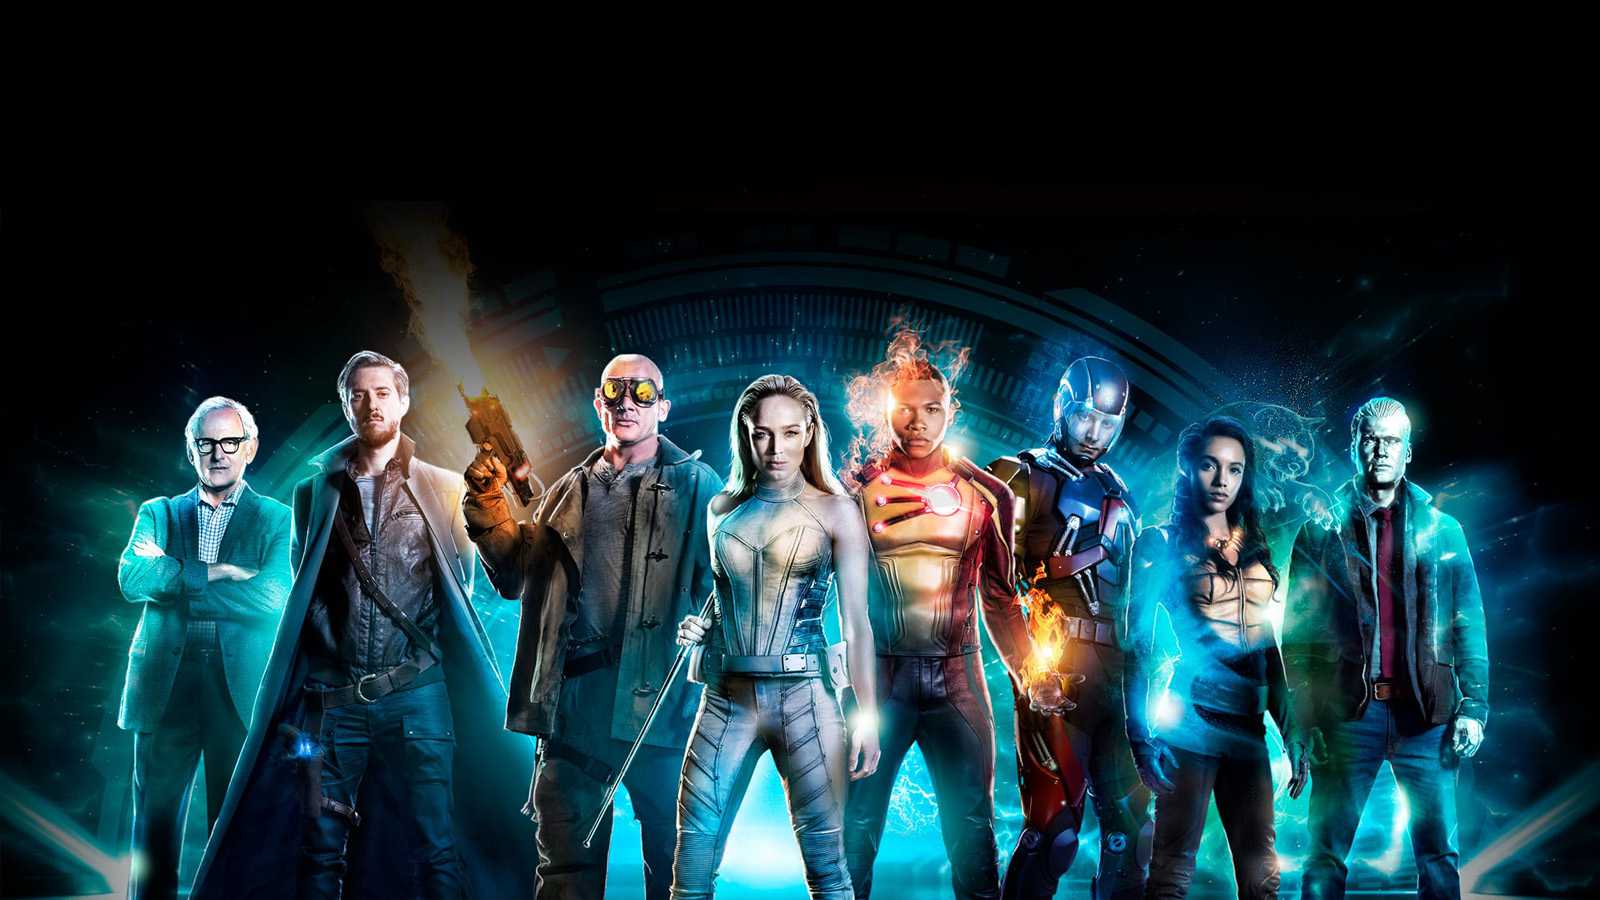 Legends of Tomorrow : Hell No, Dolly!